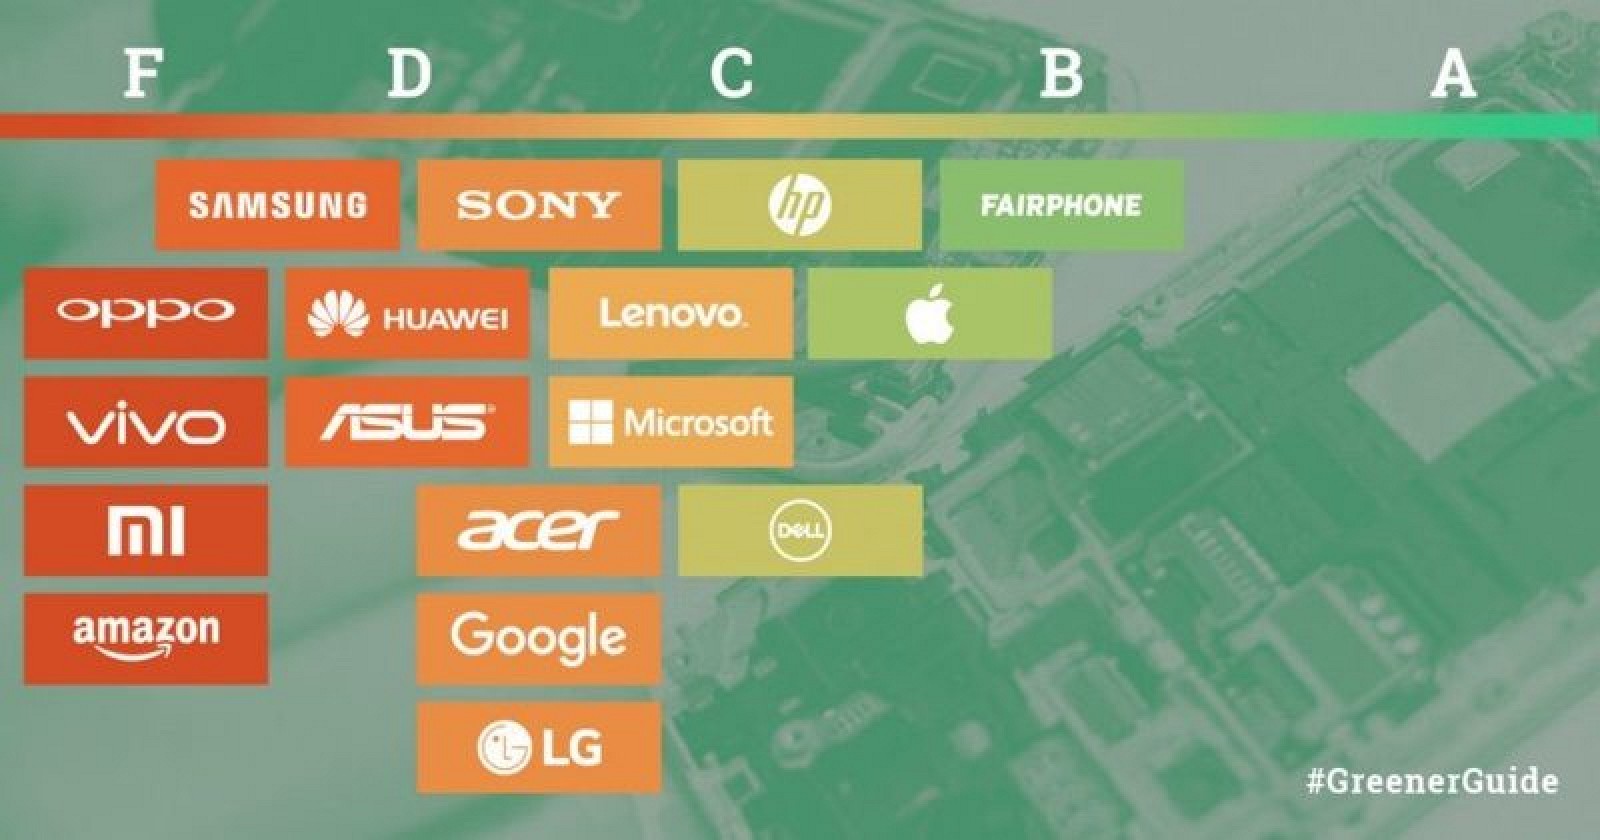 photo of Greenpeace Gives Apple a B- in 'Guide to Greener Electronics' image